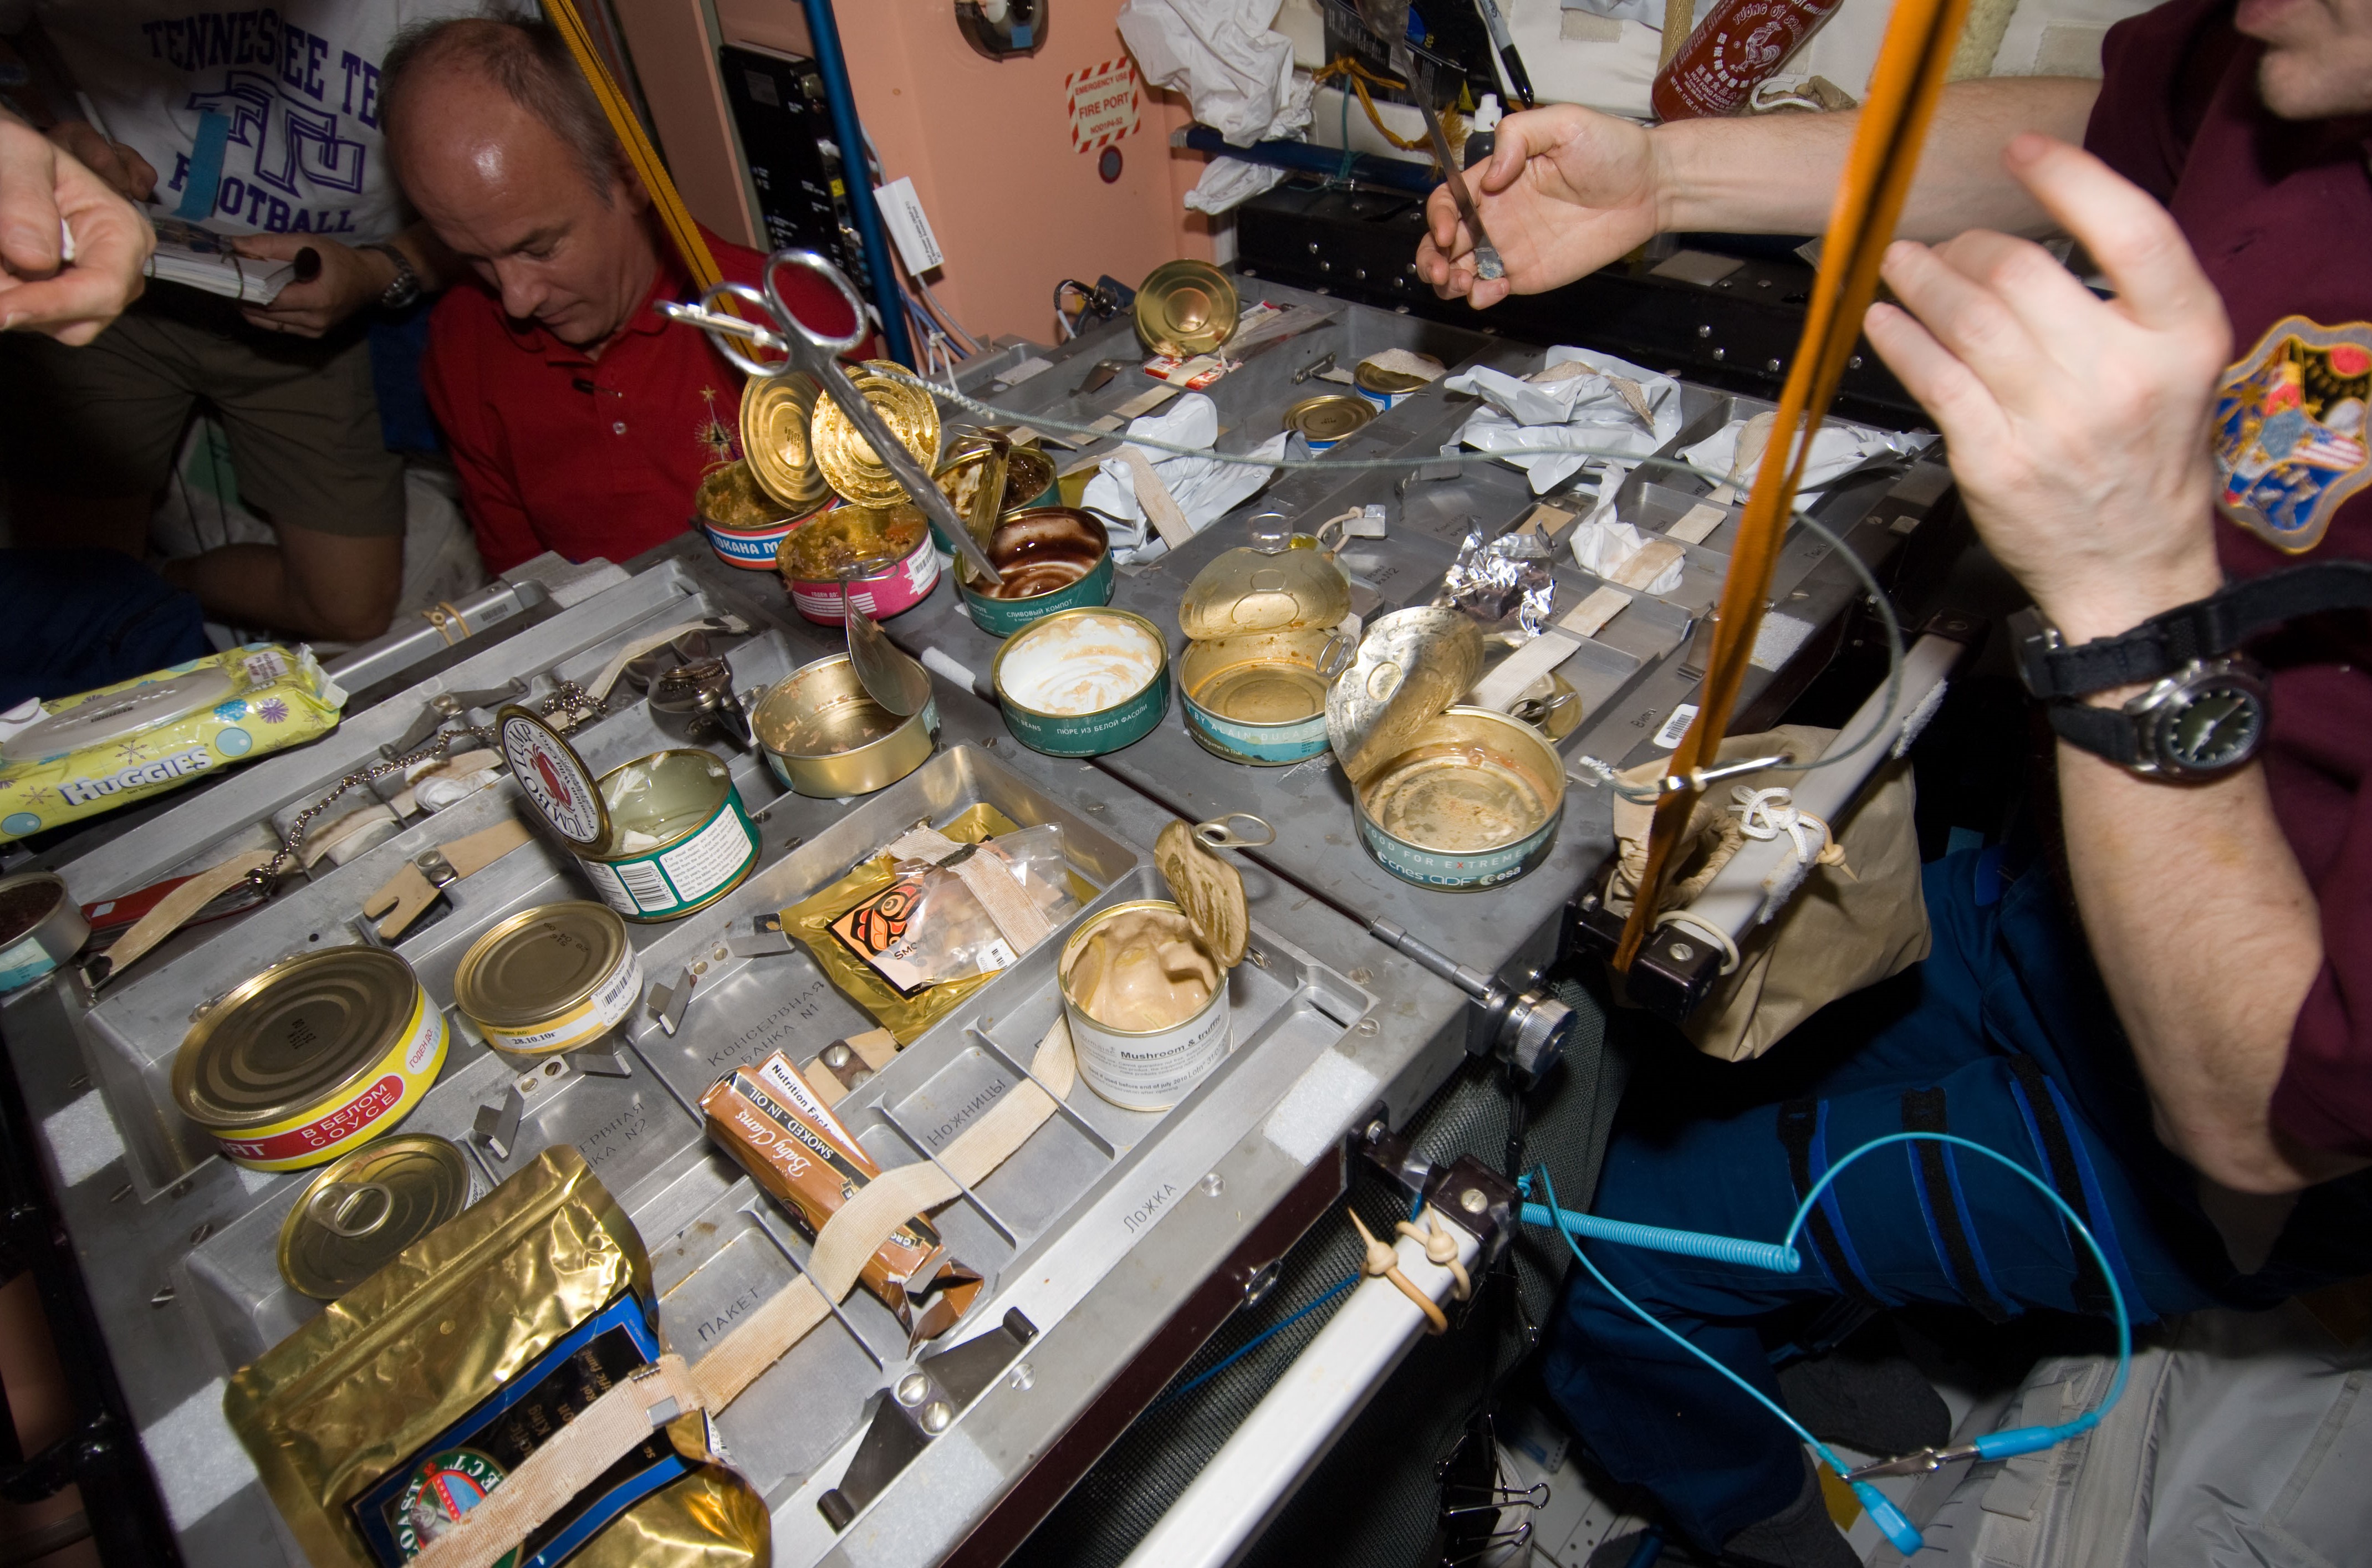 The Thanksgiving dinner for the Expedition 21 and STS-129 crews